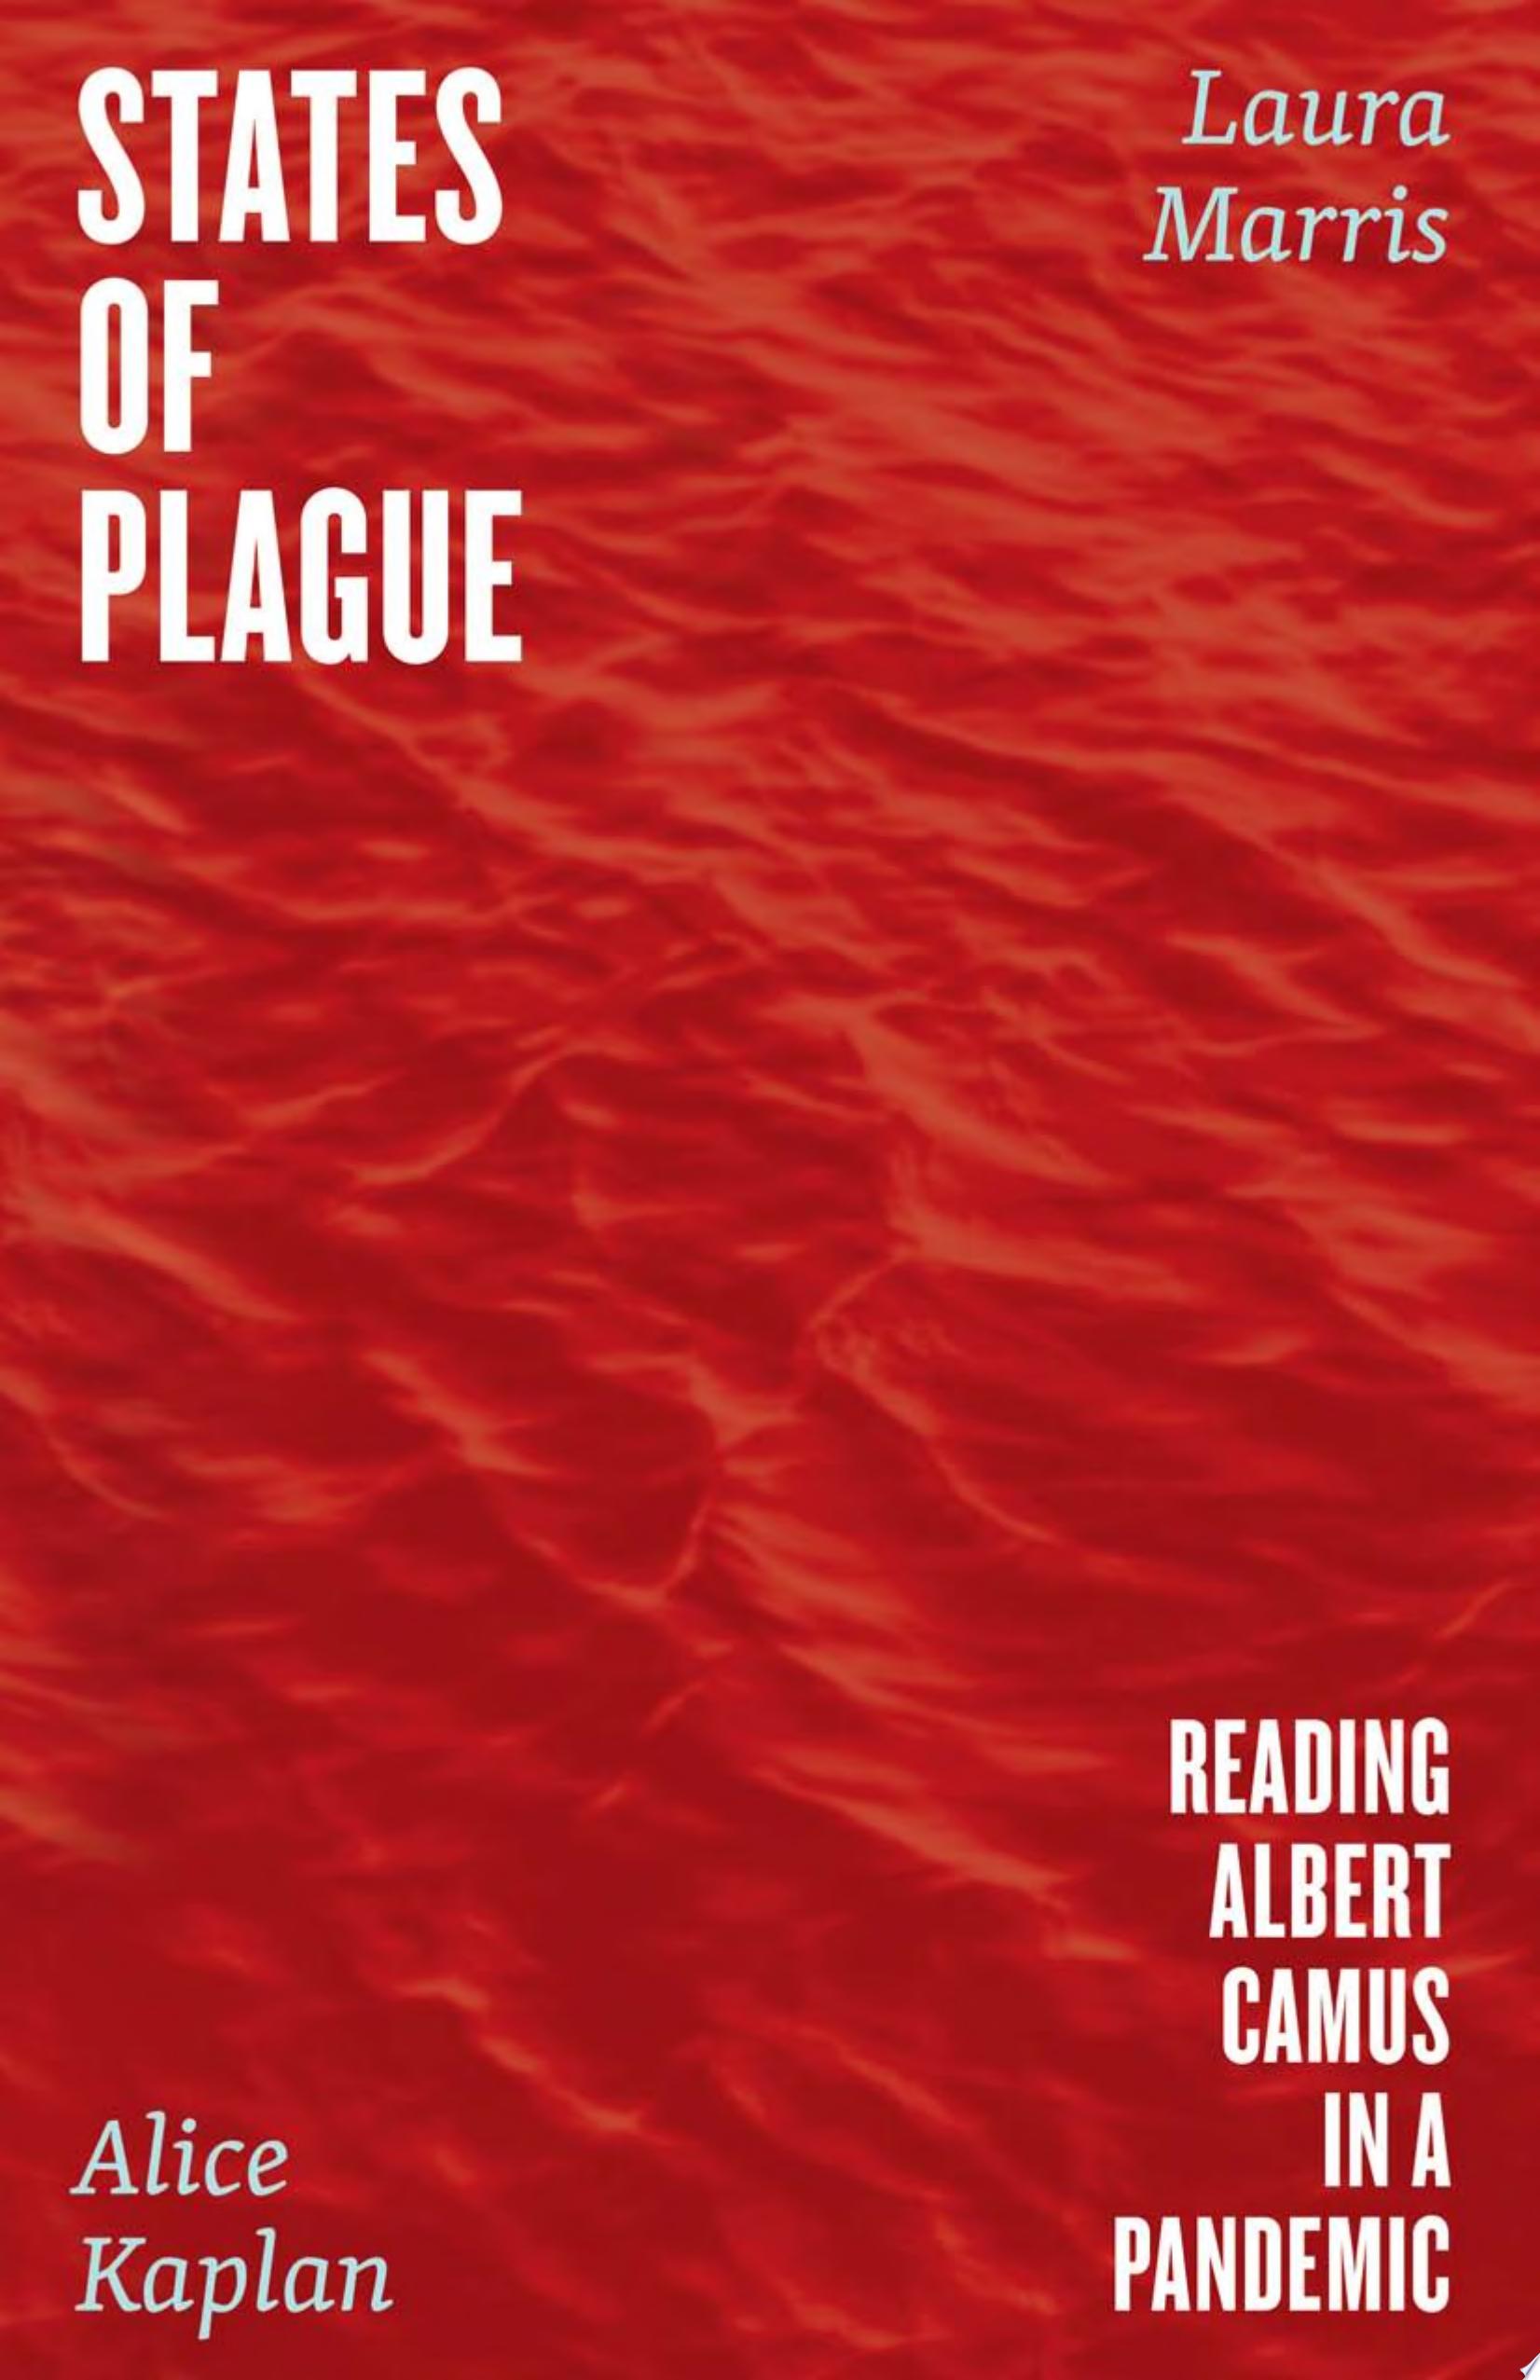 Image for "States of Plague"